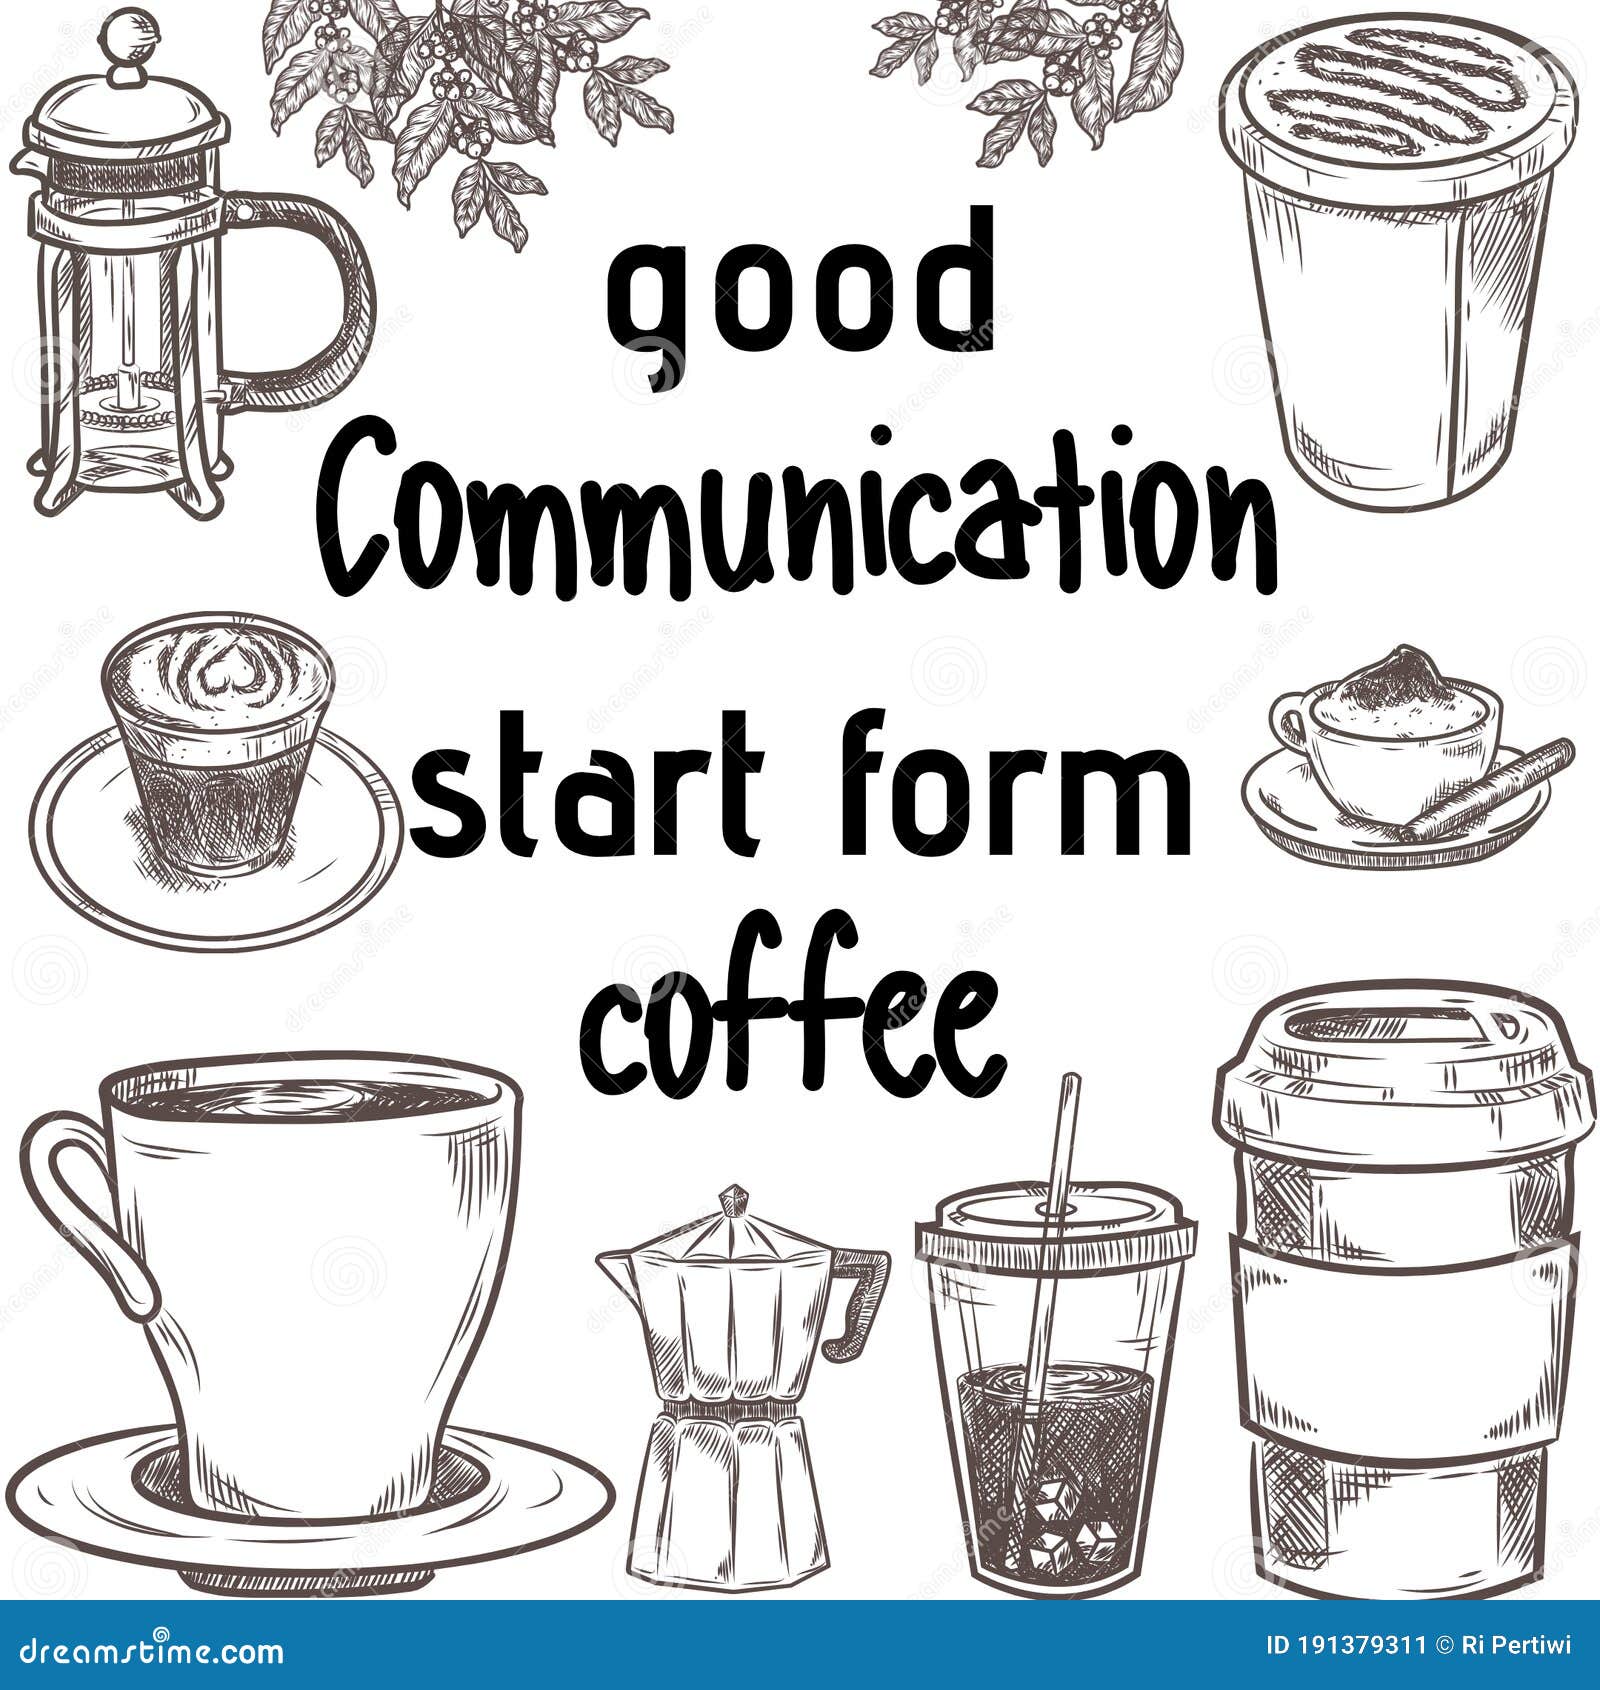 quotes coffee good comunications